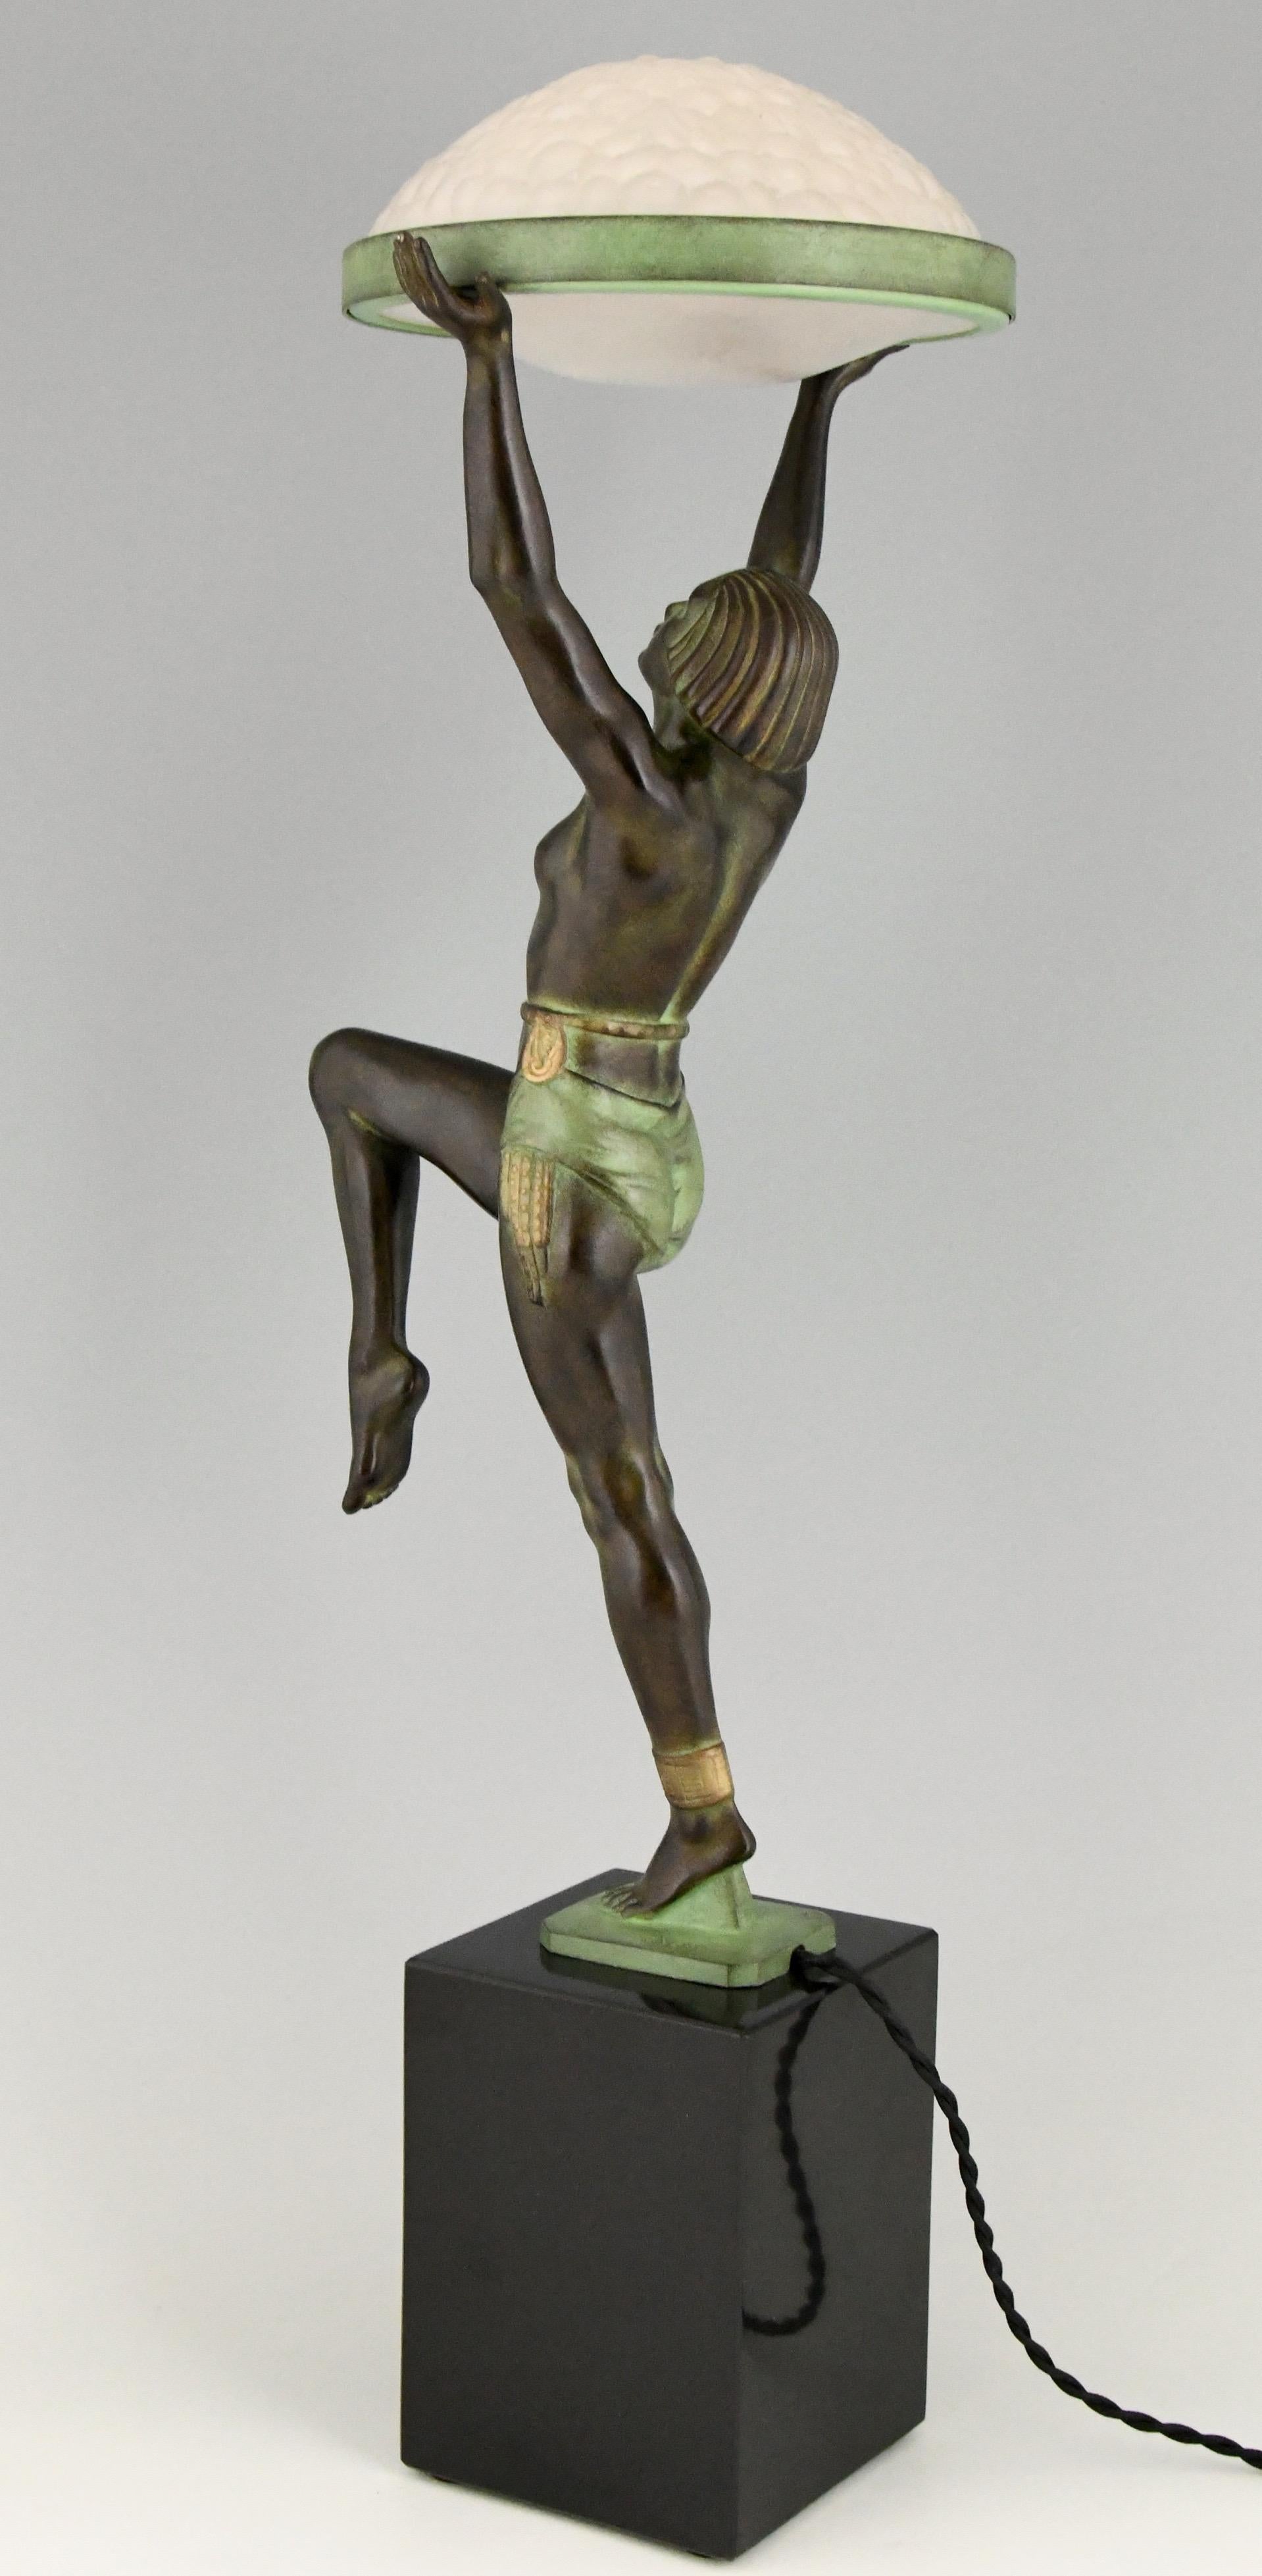 Patinated Art Deco Style Table Lamp of a Dancer Holding a Glass Shade Max Le Verrier